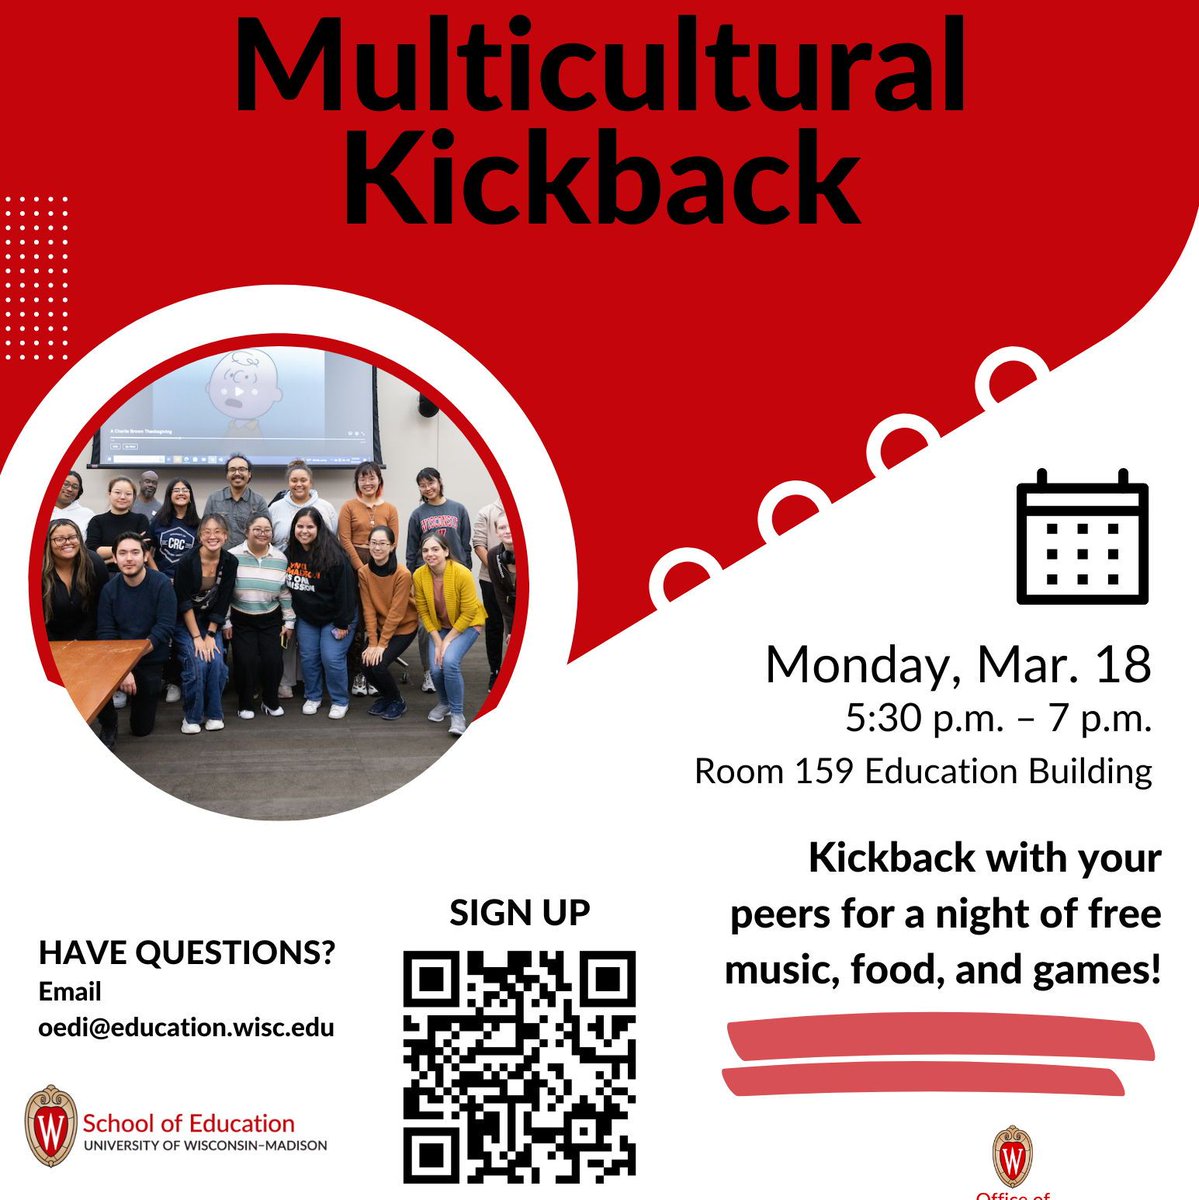 The Office of Equity Diversity and Inclusion invites you to join us at the first Multicultural Kickback of the semester on Monday, March 18 in room 159 in the Education Building anytime between 5:30 pm and 7 pm for free food and hangout with peers. RSVP: buff.ly/3TfngM8